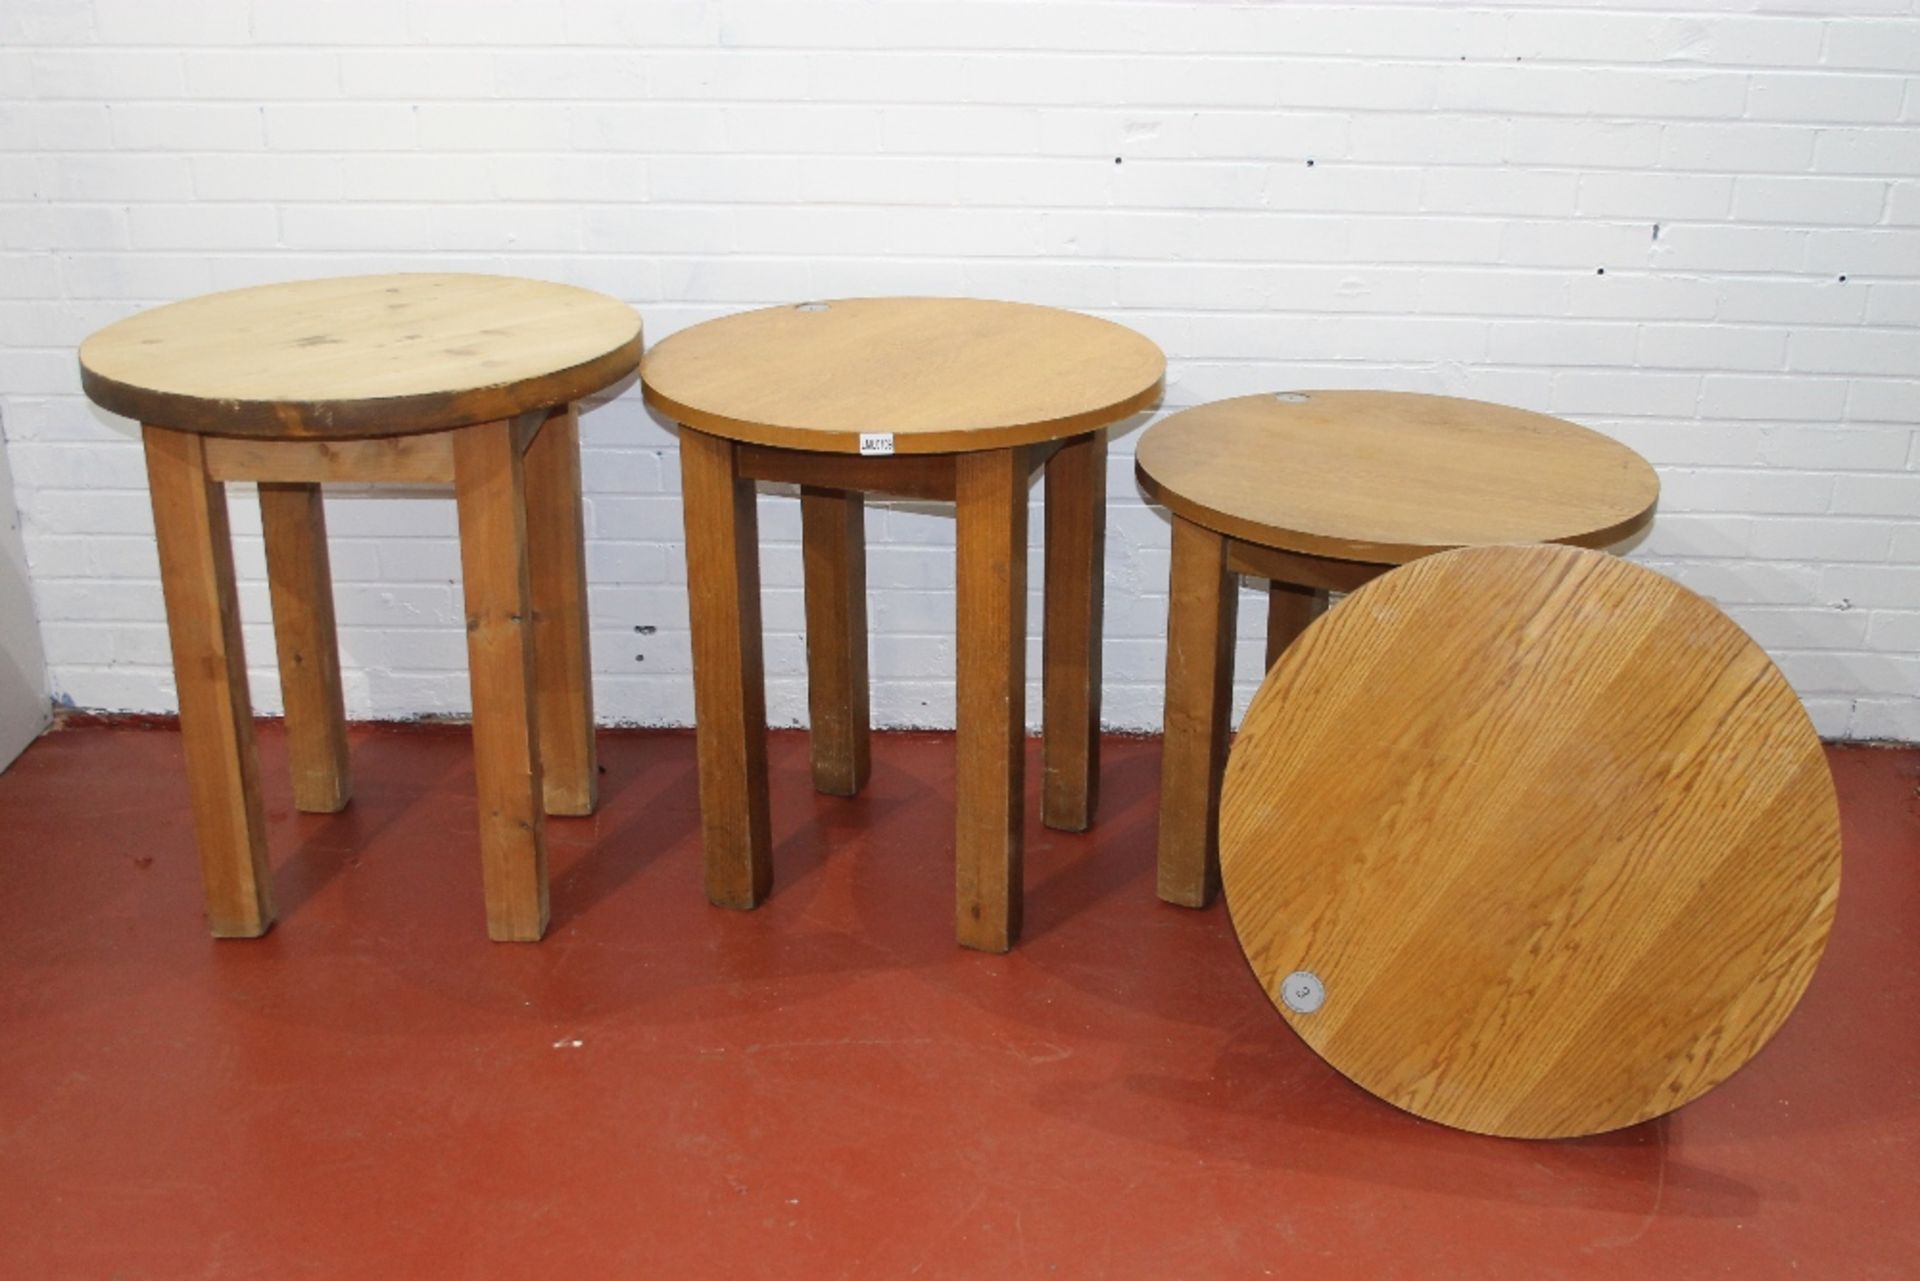 Four Heavy Duty Round Wooden Tables